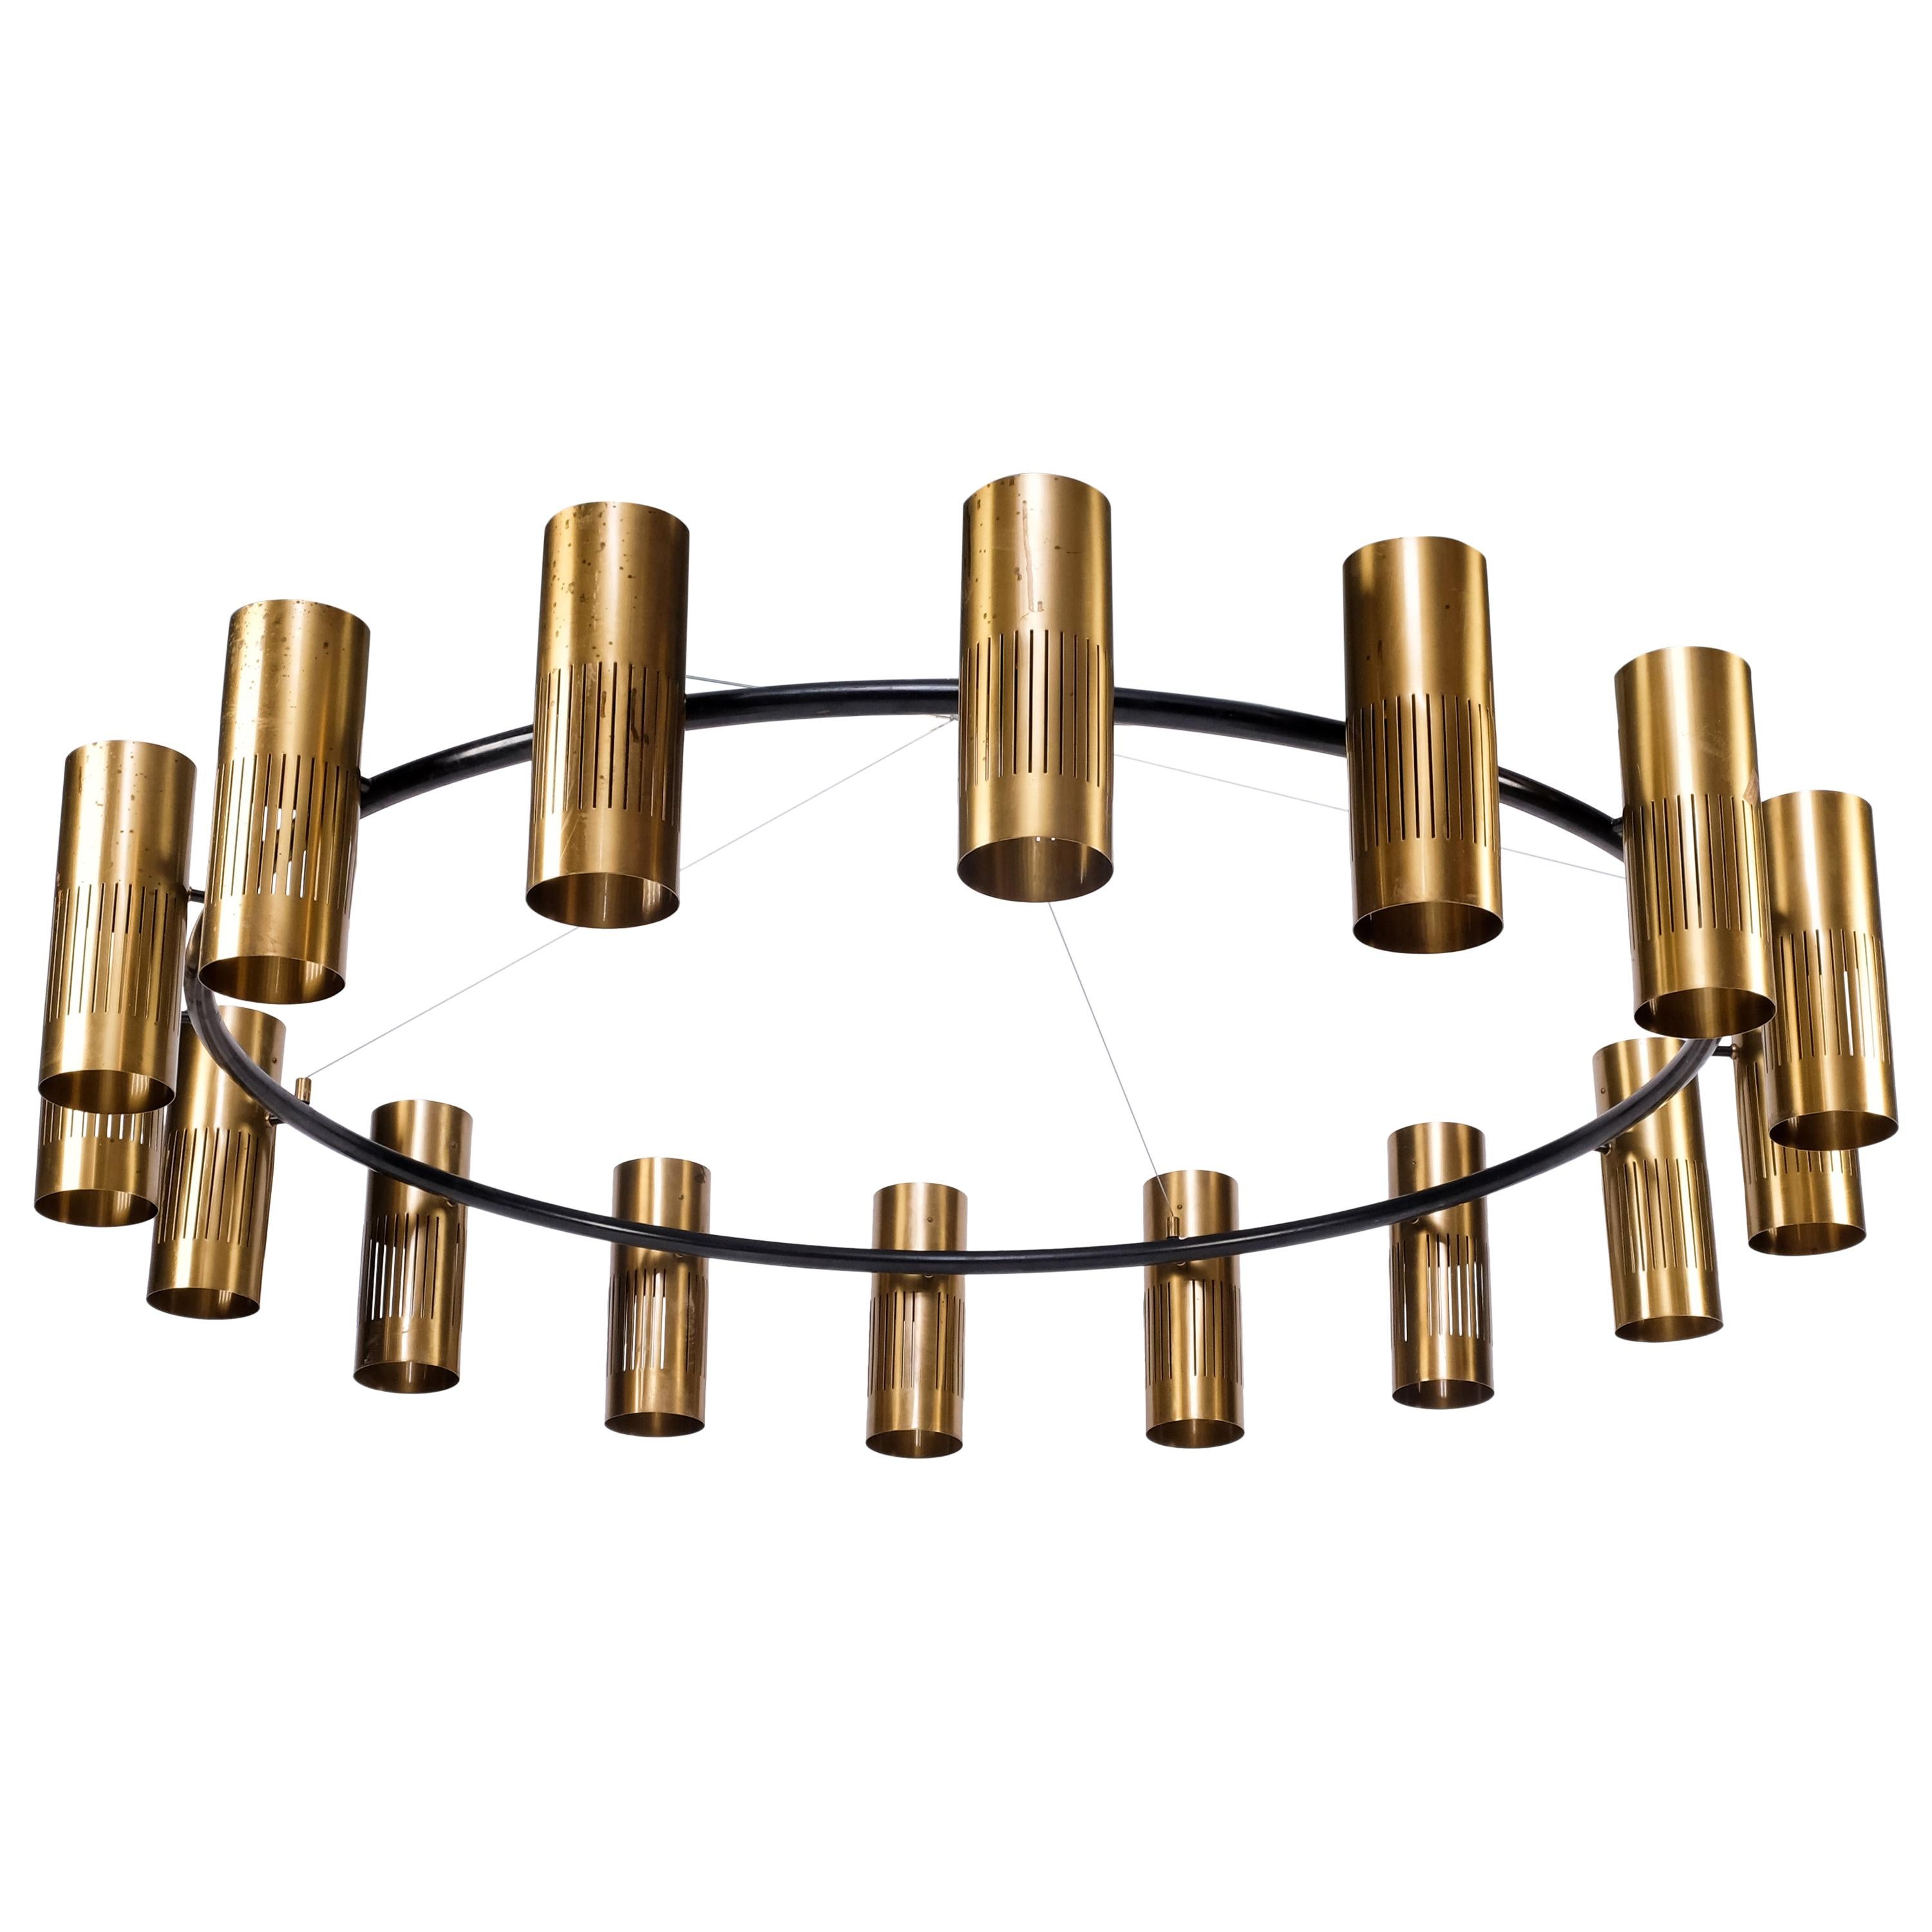 Unique Swedish Brass Chandeliers from 1959